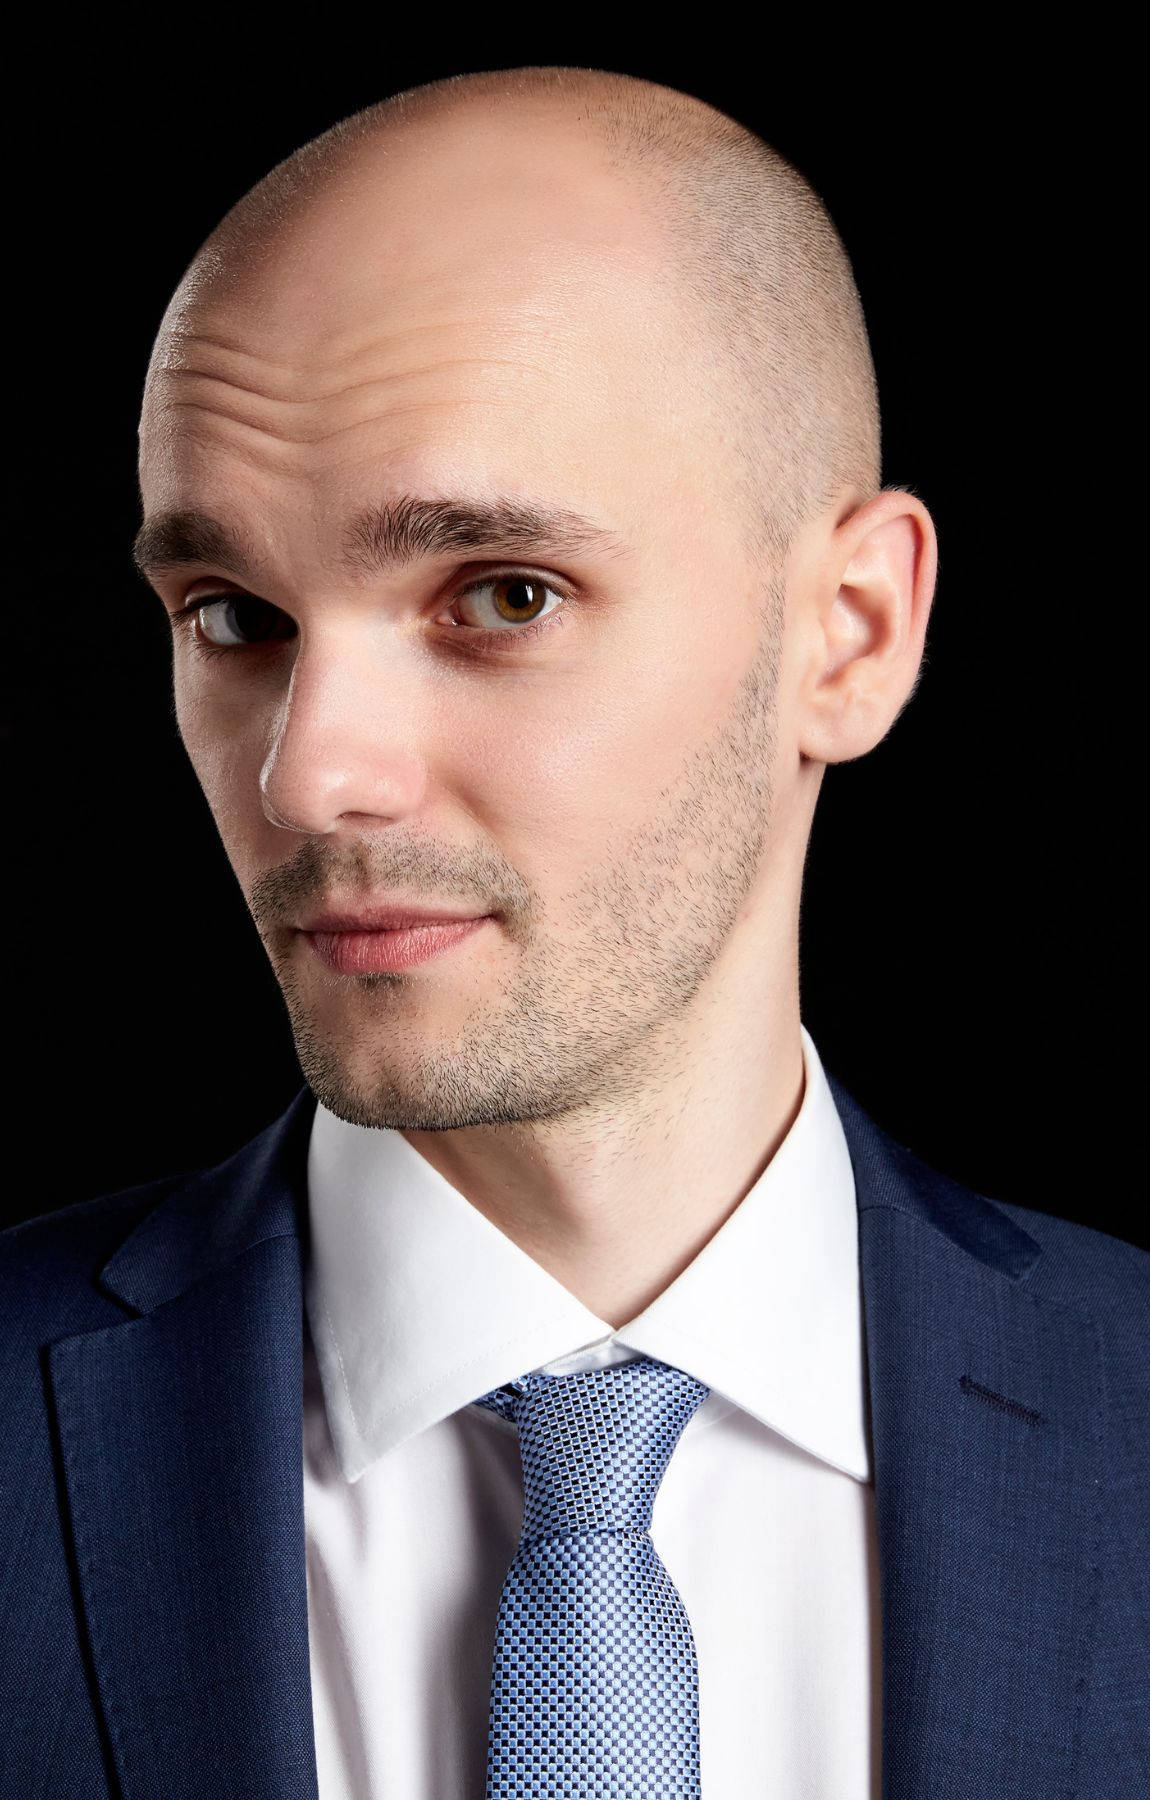 Bald Man Wearing Suit And Tie Picture